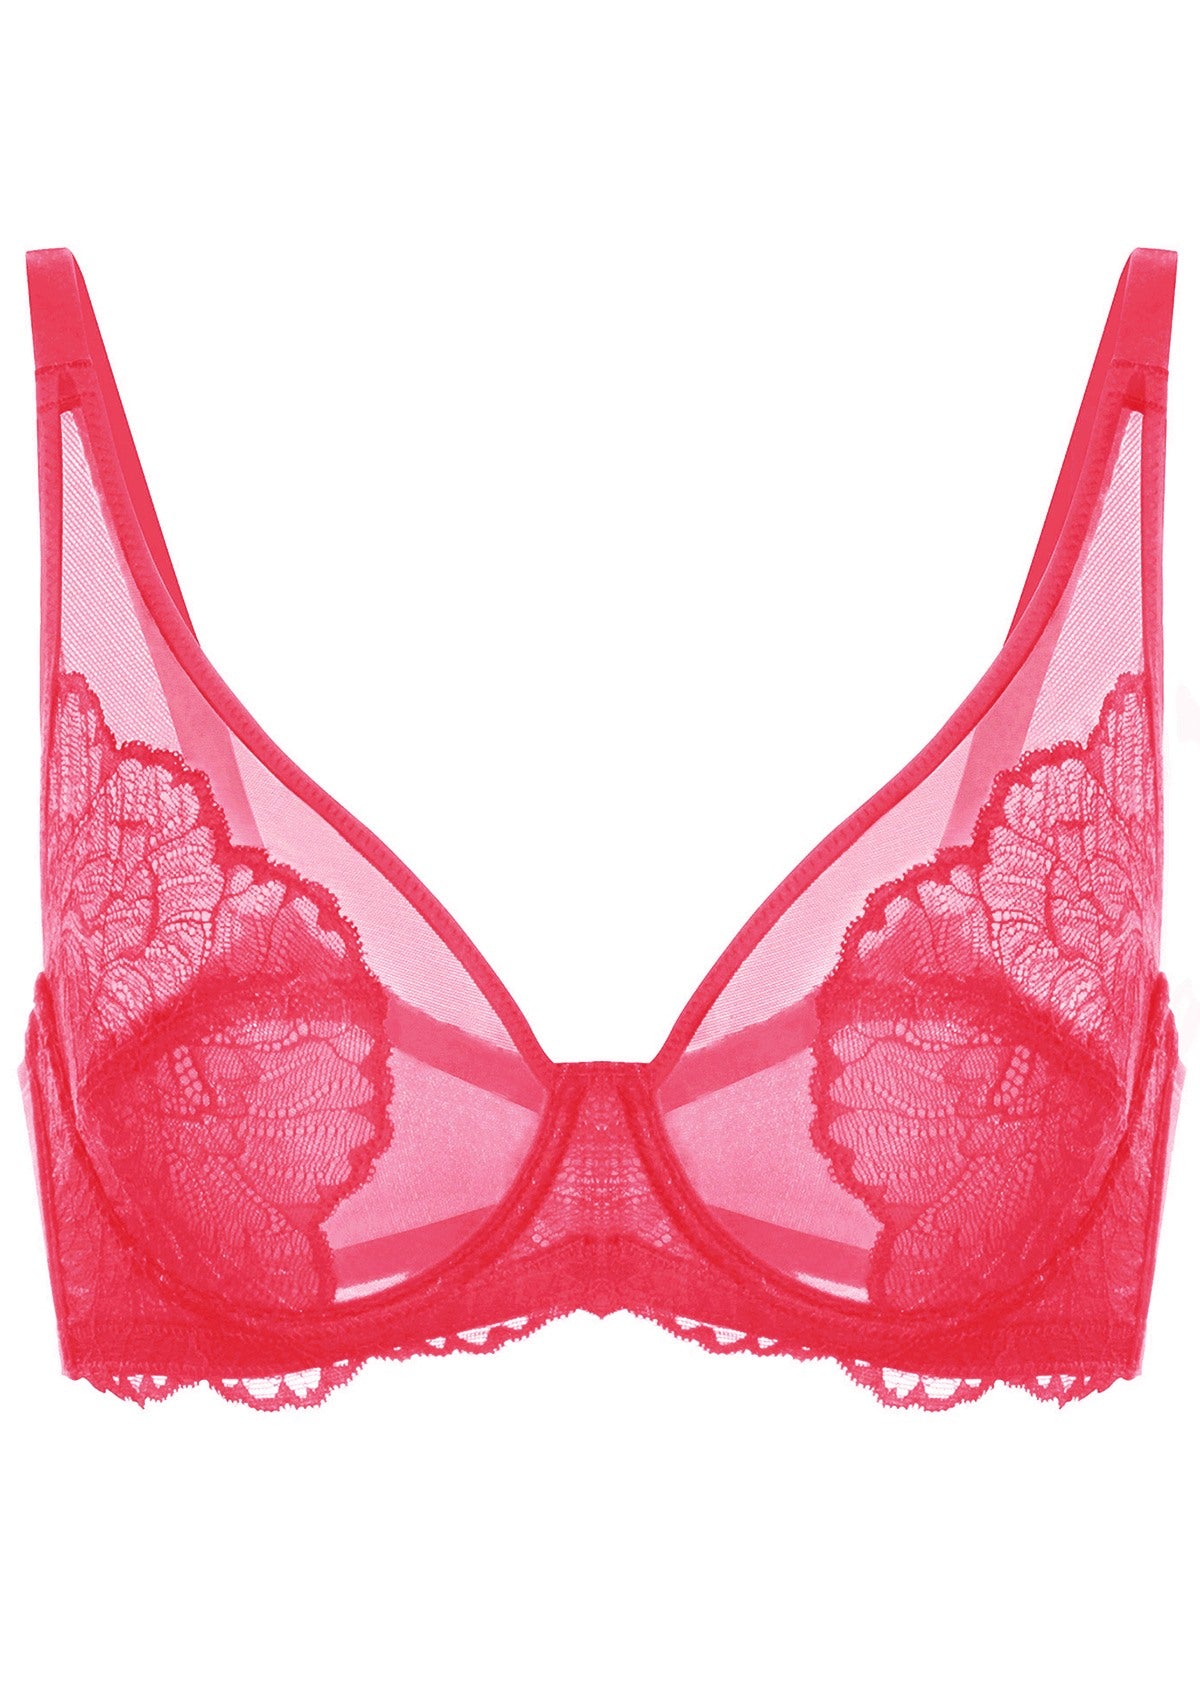 HSIA Blossom Unlined Lace Underwire Bra - Light Coral / 34 / D